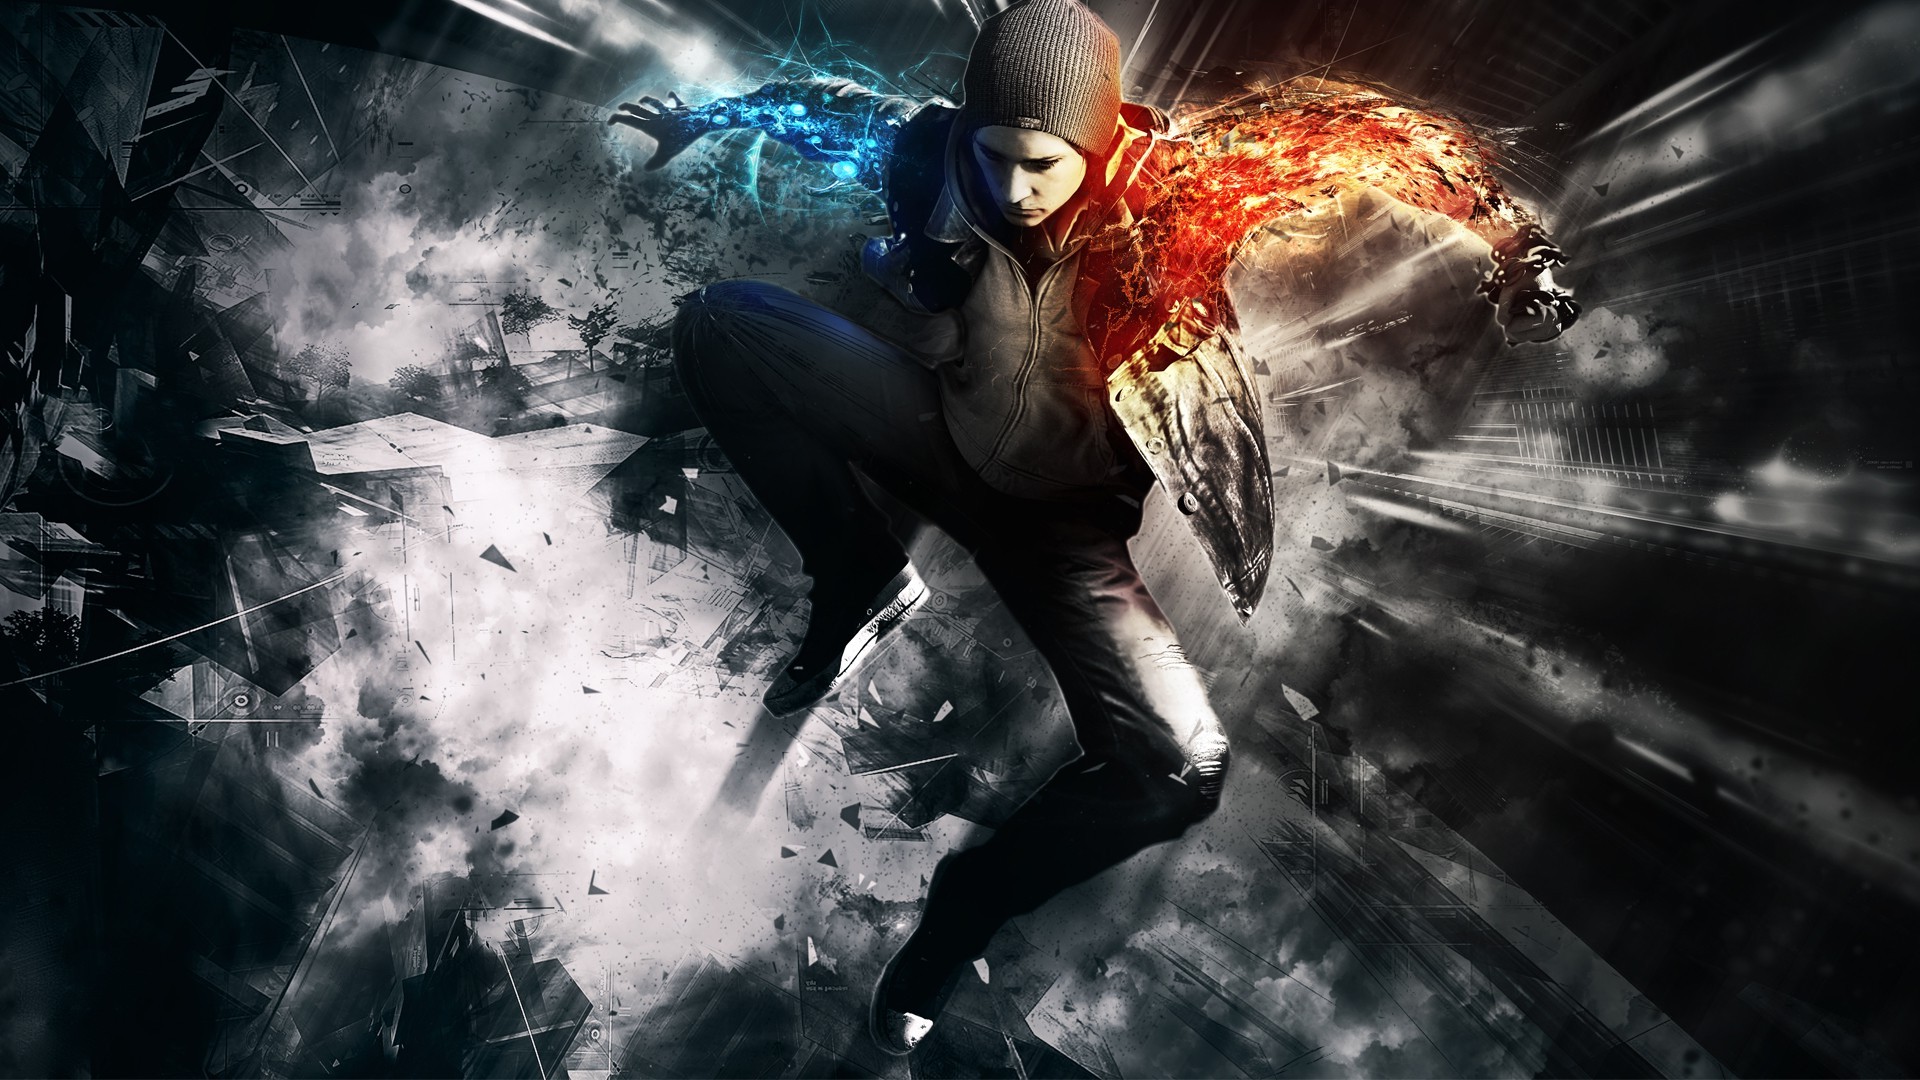 download free infamous 2